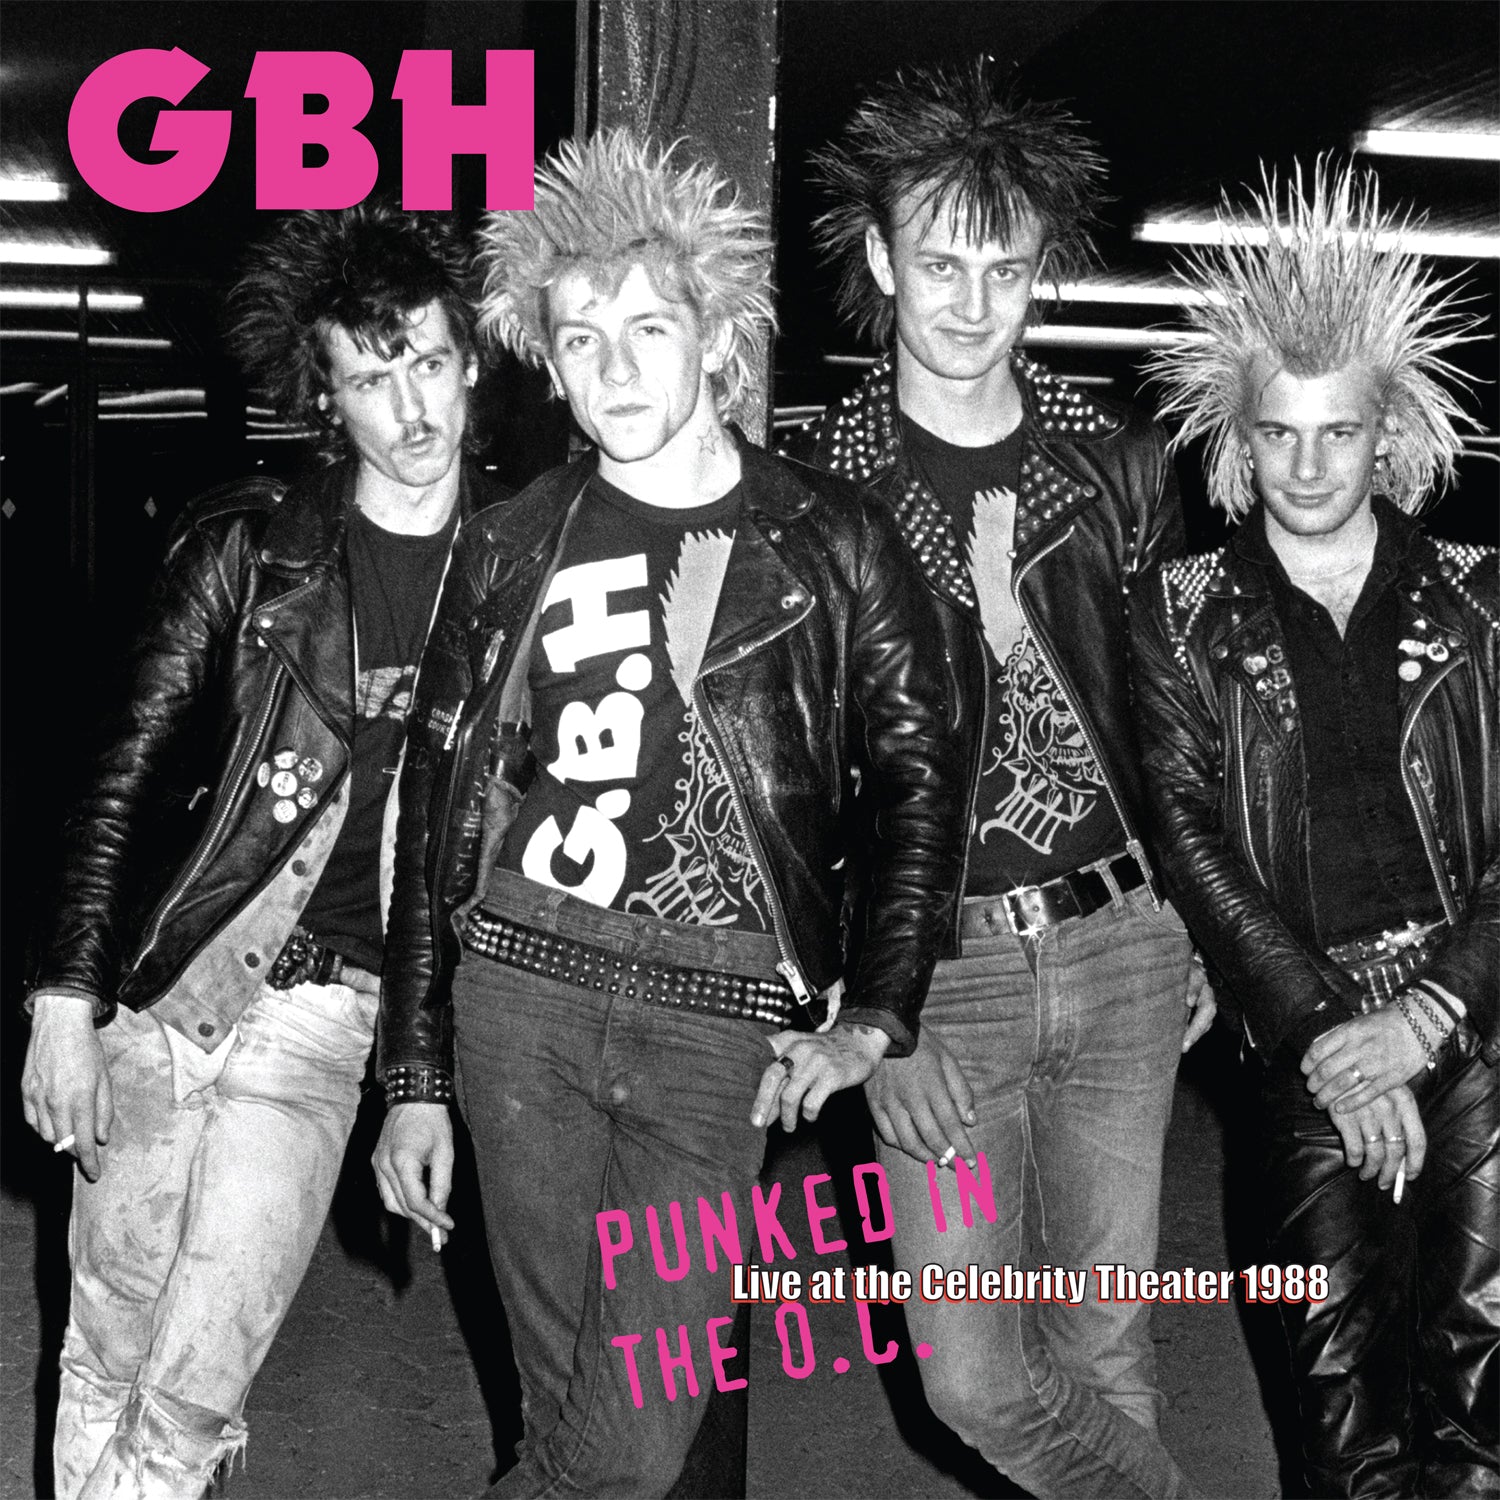 GBH - Punked In The O.C. - Live At The Celebrity Theater 88'